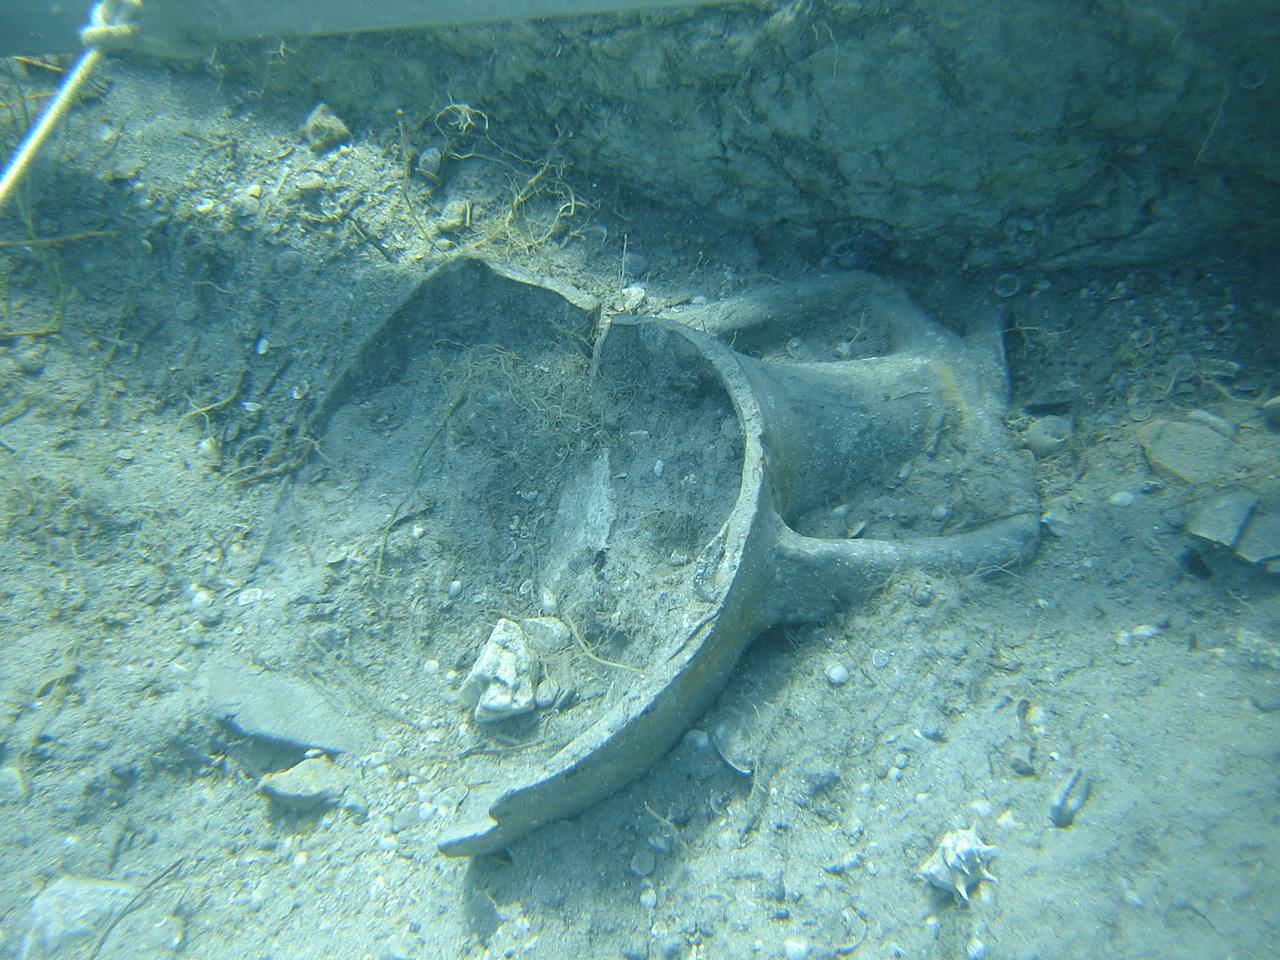  Artefact being excavated prior to recovery